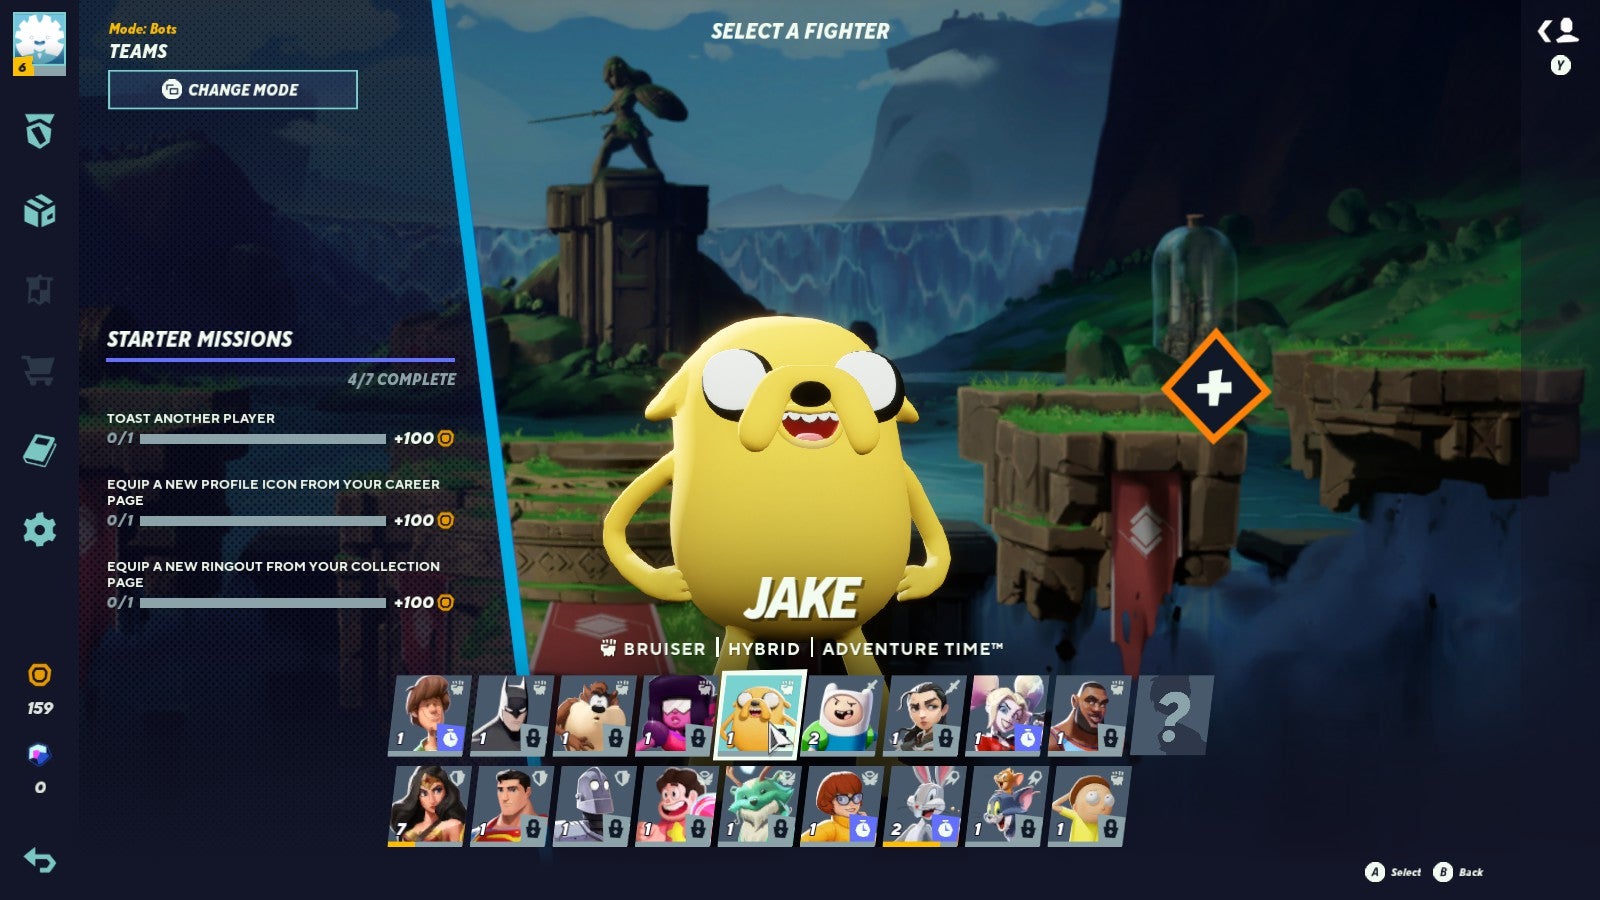 Multiversus review - the character select screen with Jake from Adventure Time selected